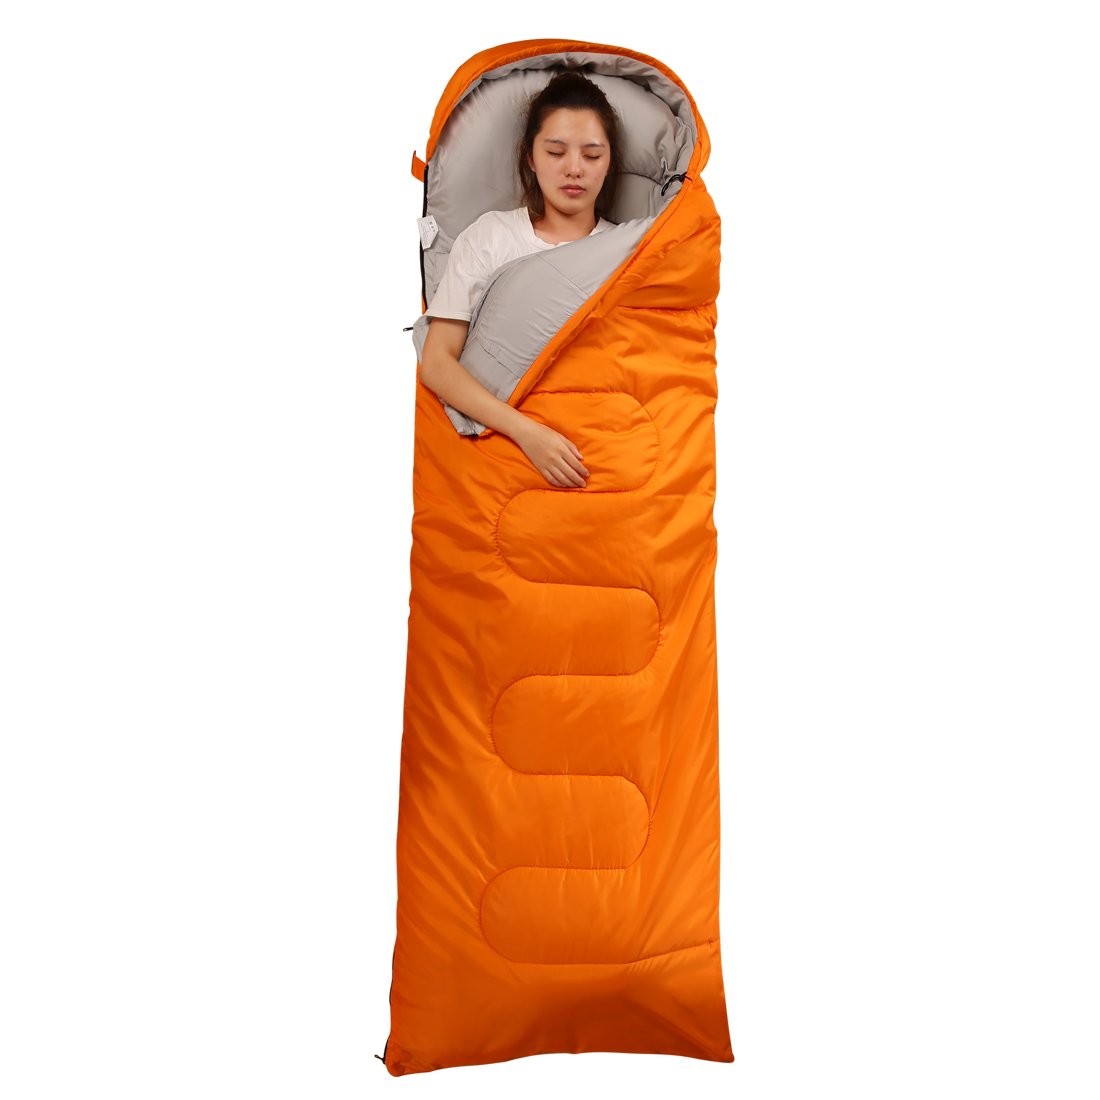 FARLAND Mummy Sleeping Bags 20℉ for Adults Teens Kids with Compression Sack Portable and Lightweight for 3-4 Season Camping, Hik